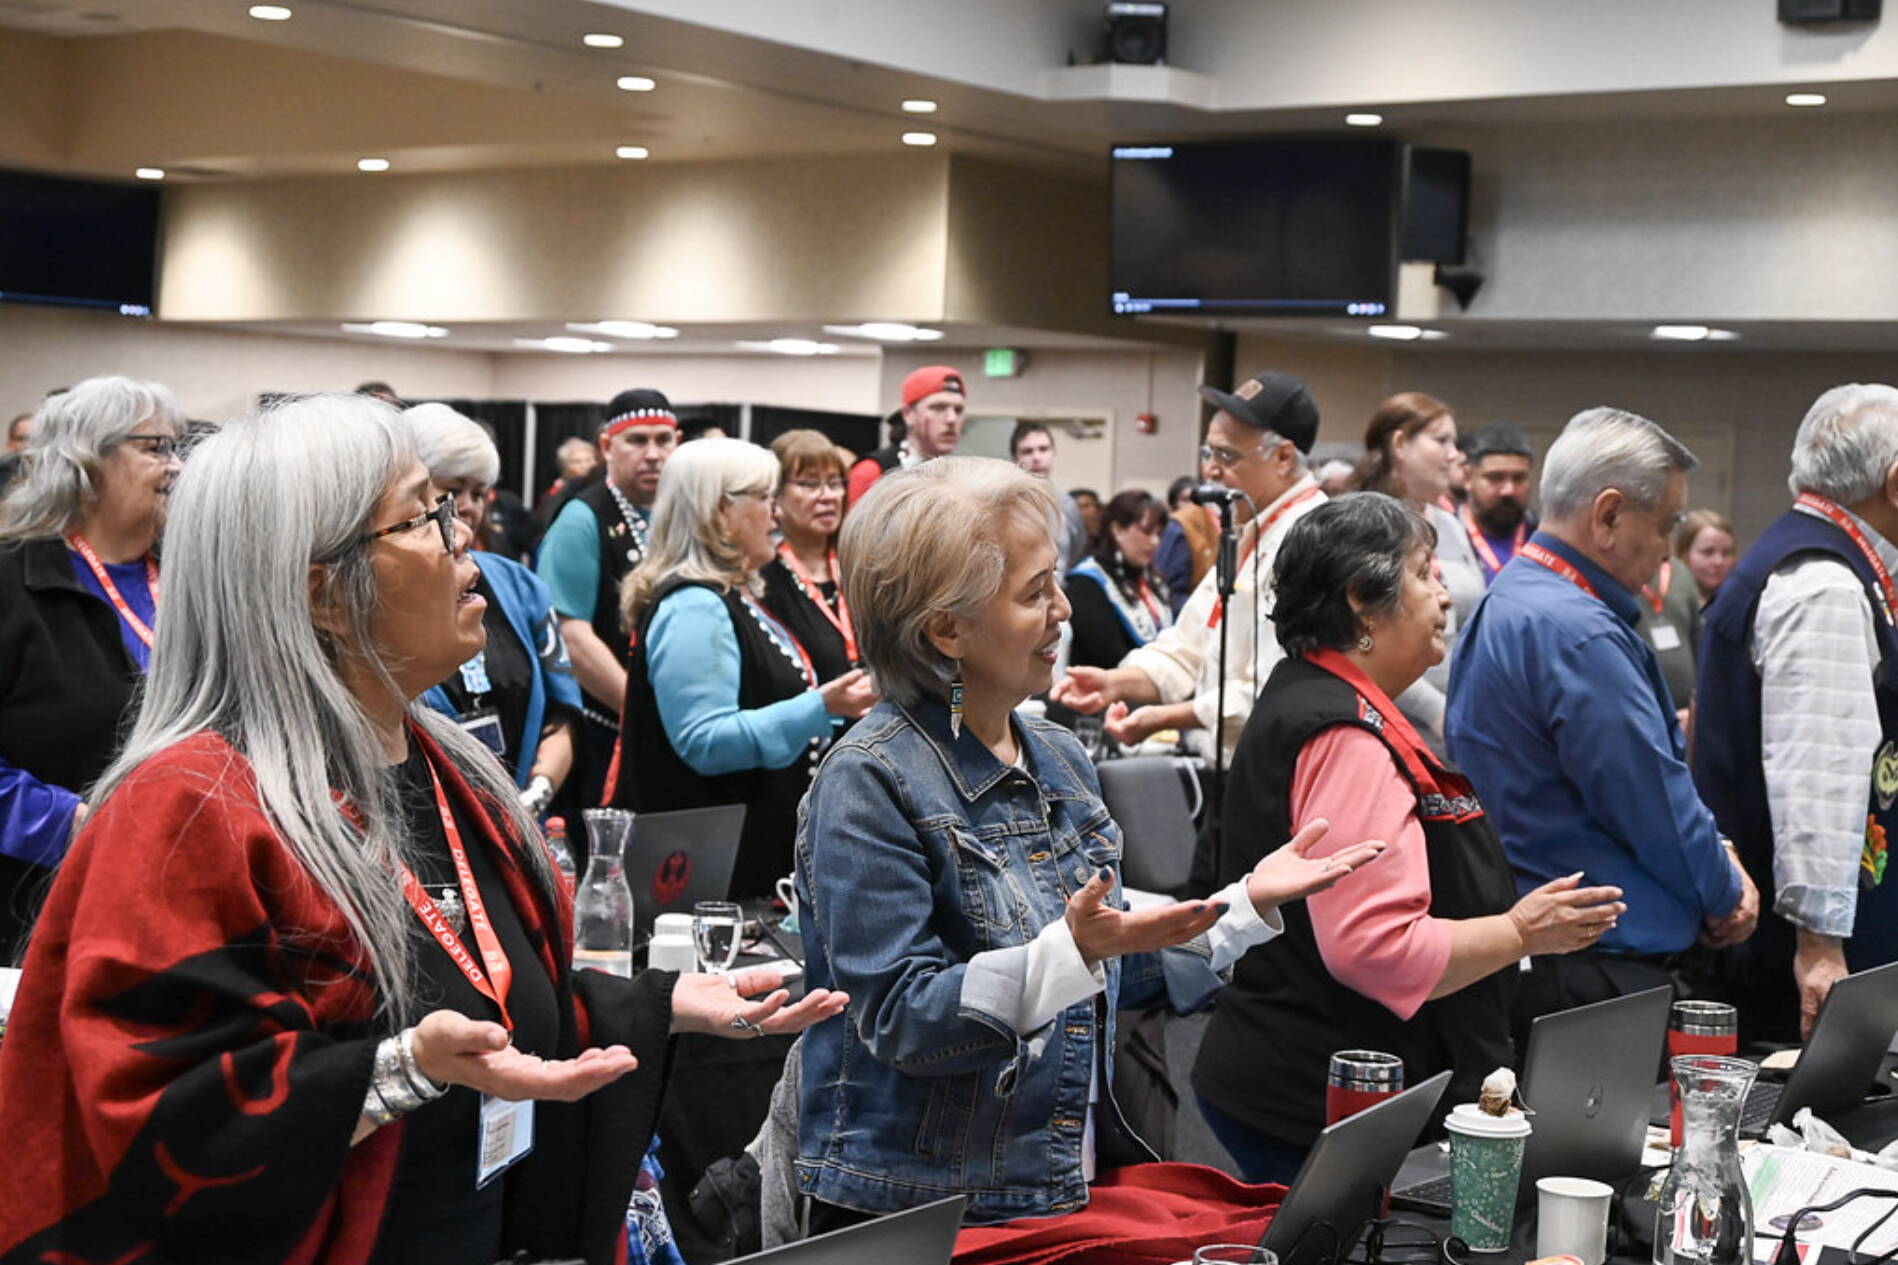 Delegates offer prayers during the Central Council of the Tlingit and Haida Indian Tribes of Alaska’s 89th Annual Tribal Assembly on Thursday at Elizabeth Peratrovich Hall. (Muriel Reid / Central Council of Tlingit and Haida Indian Tribes of Alaska)